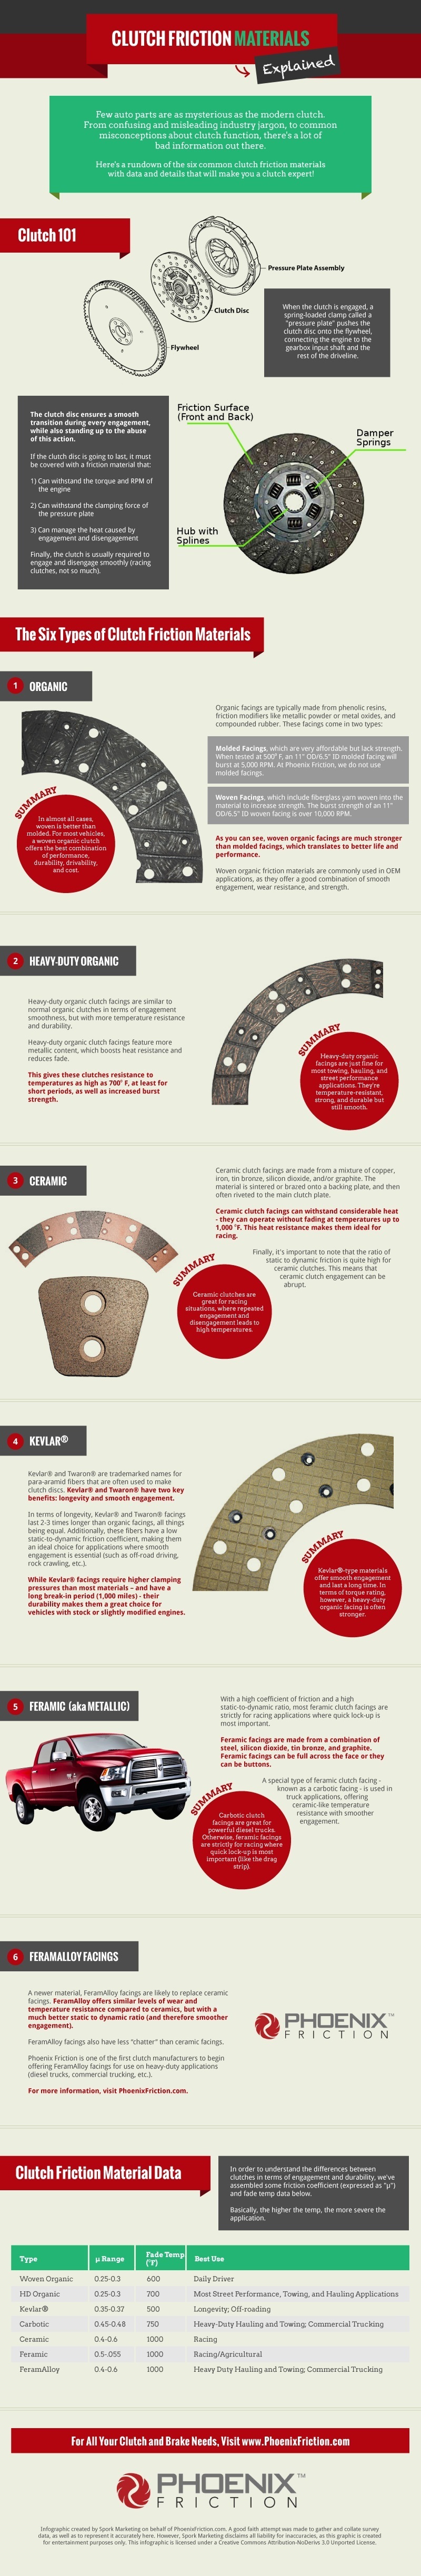 Clutch-Friction-Material-Infographic (1)